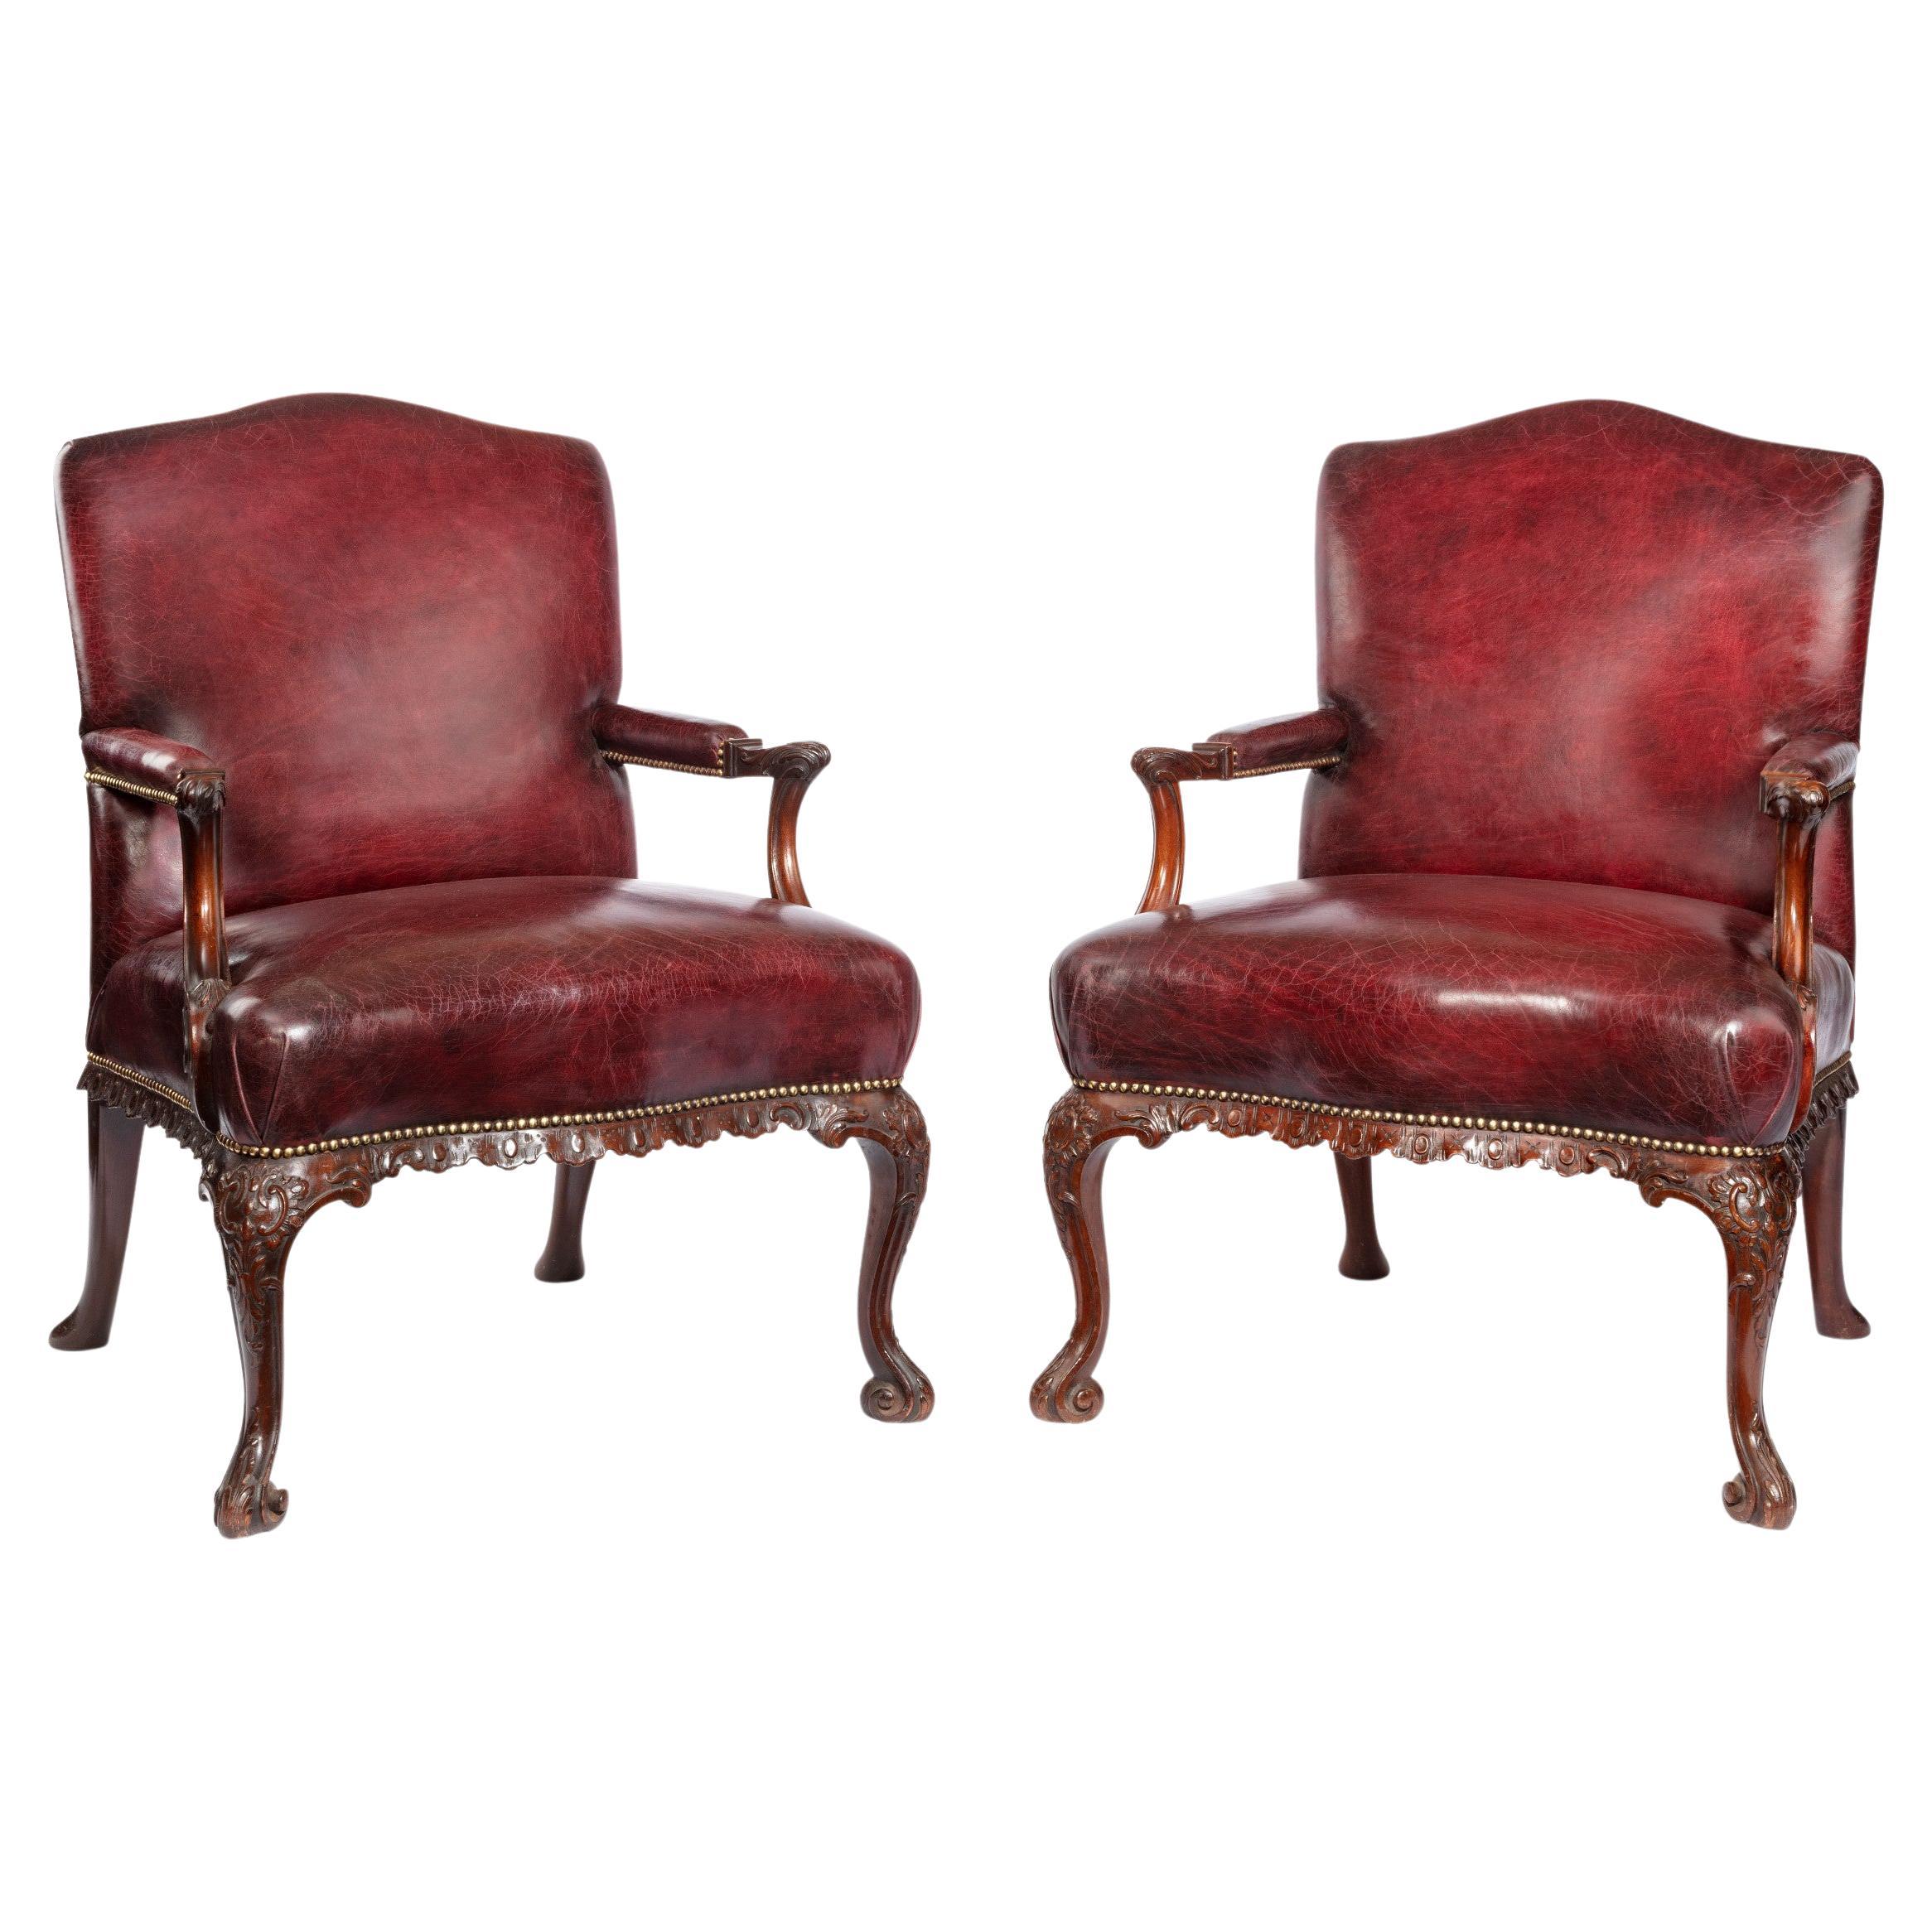 Late Victorian Mahogany Open Arm Chairs in the Chippendale Taste